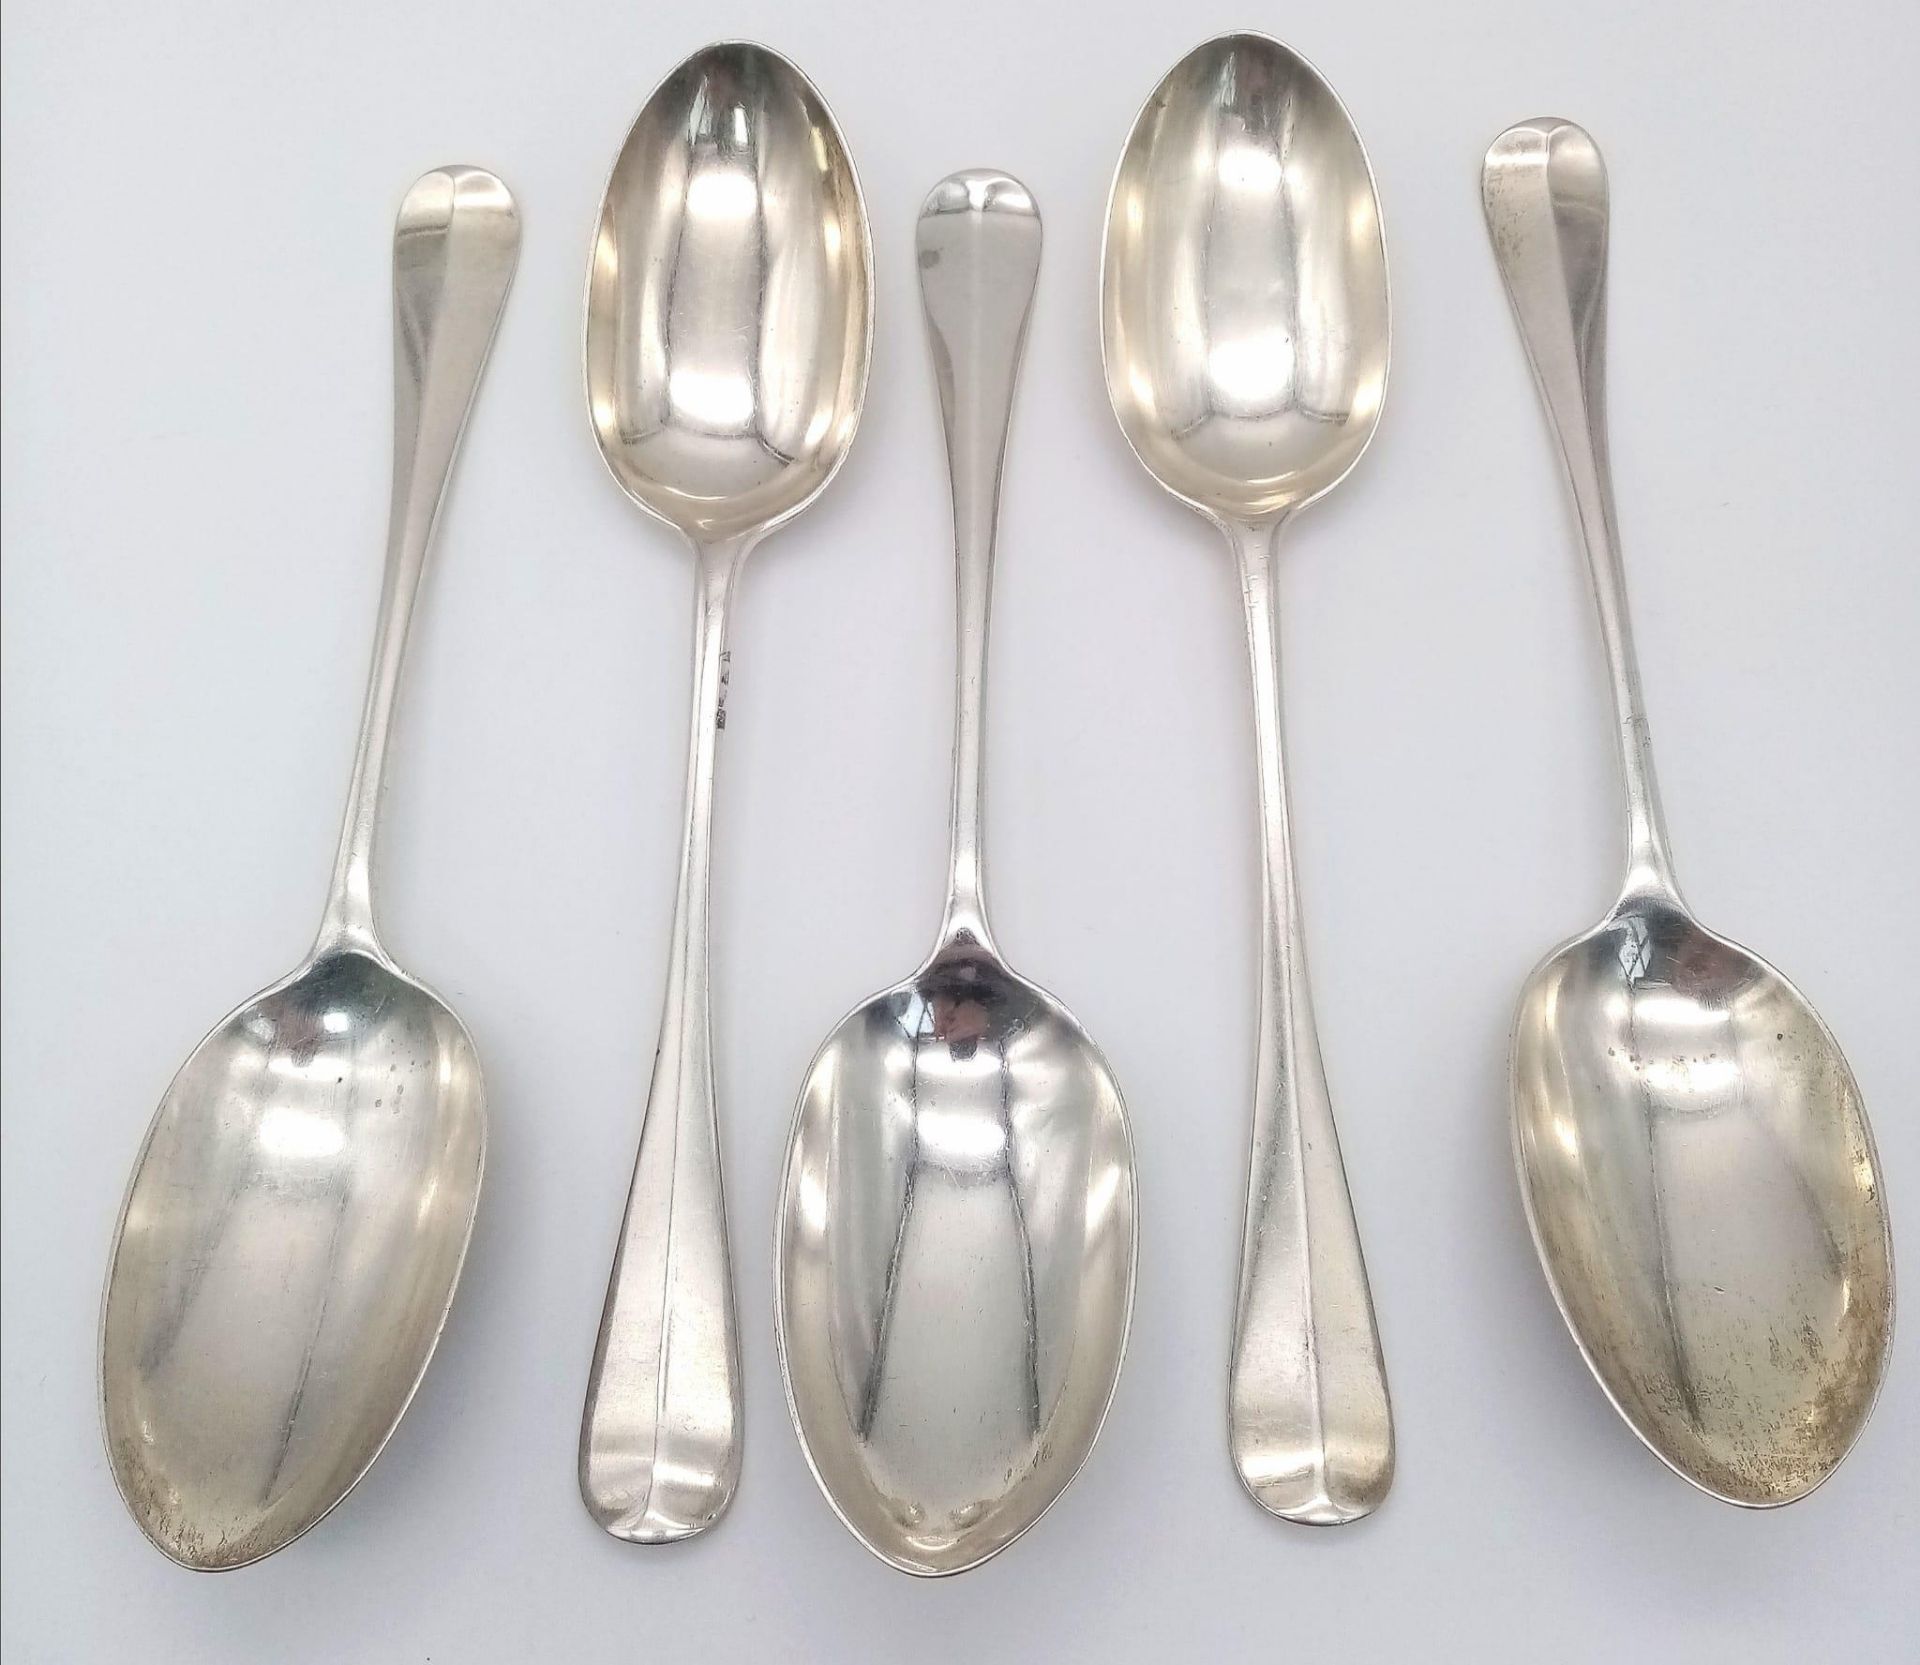 Five Antique Sterling Silver Large Serving Spoons. 21cm. Hallmarks for London 1924. 410g weight.